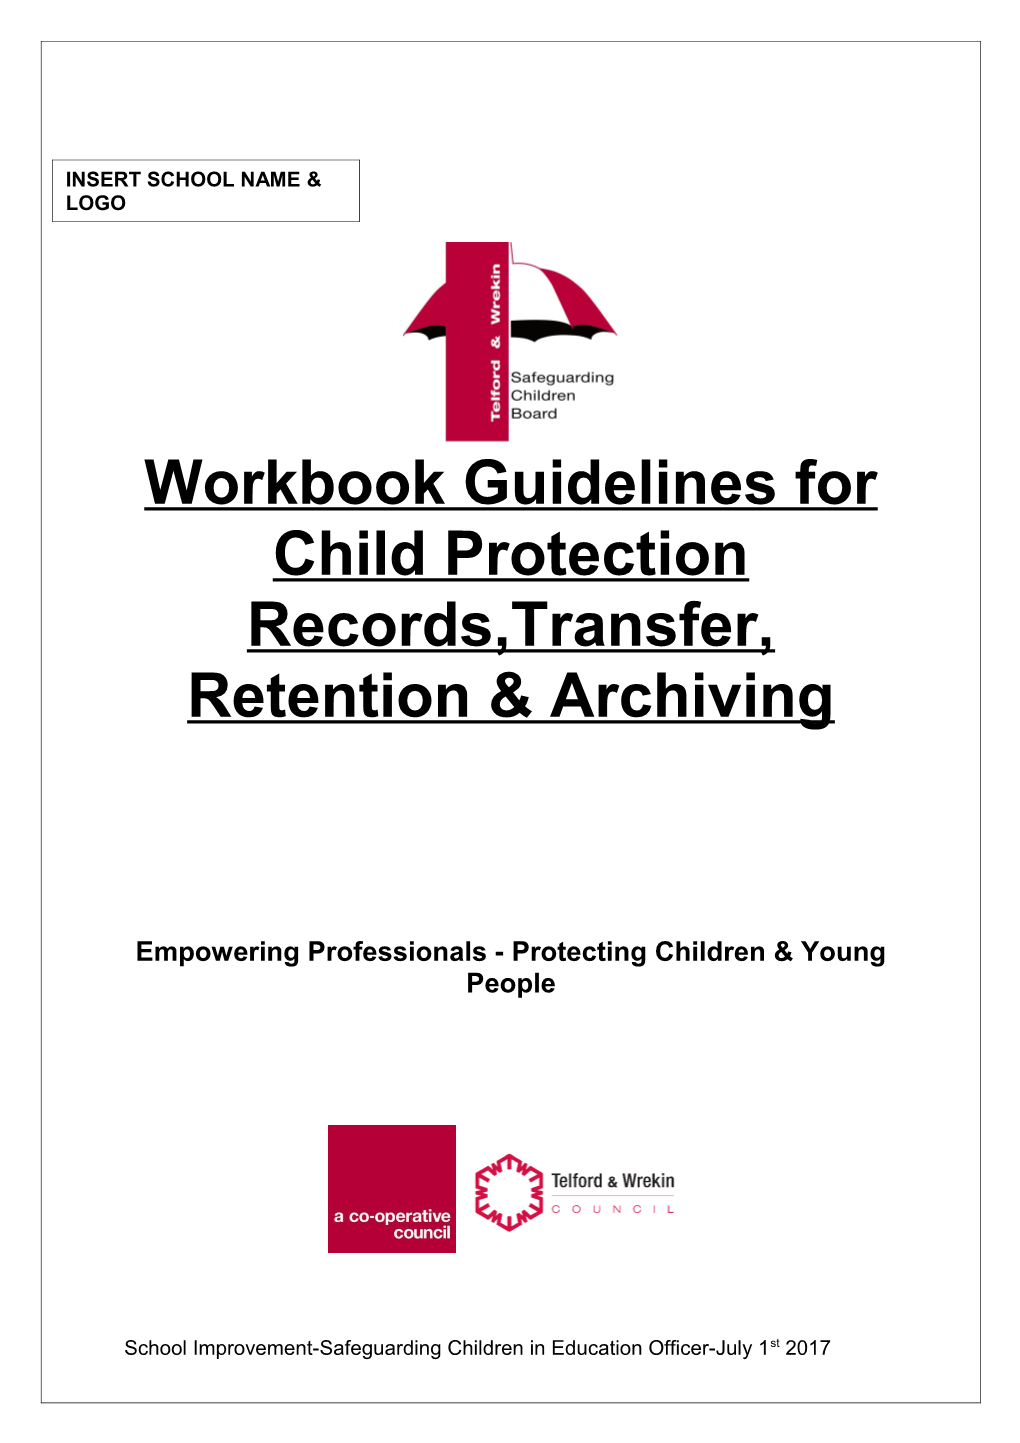 Workbook Guidelines for Child Protection Records,Transfer, Retention & Archiving